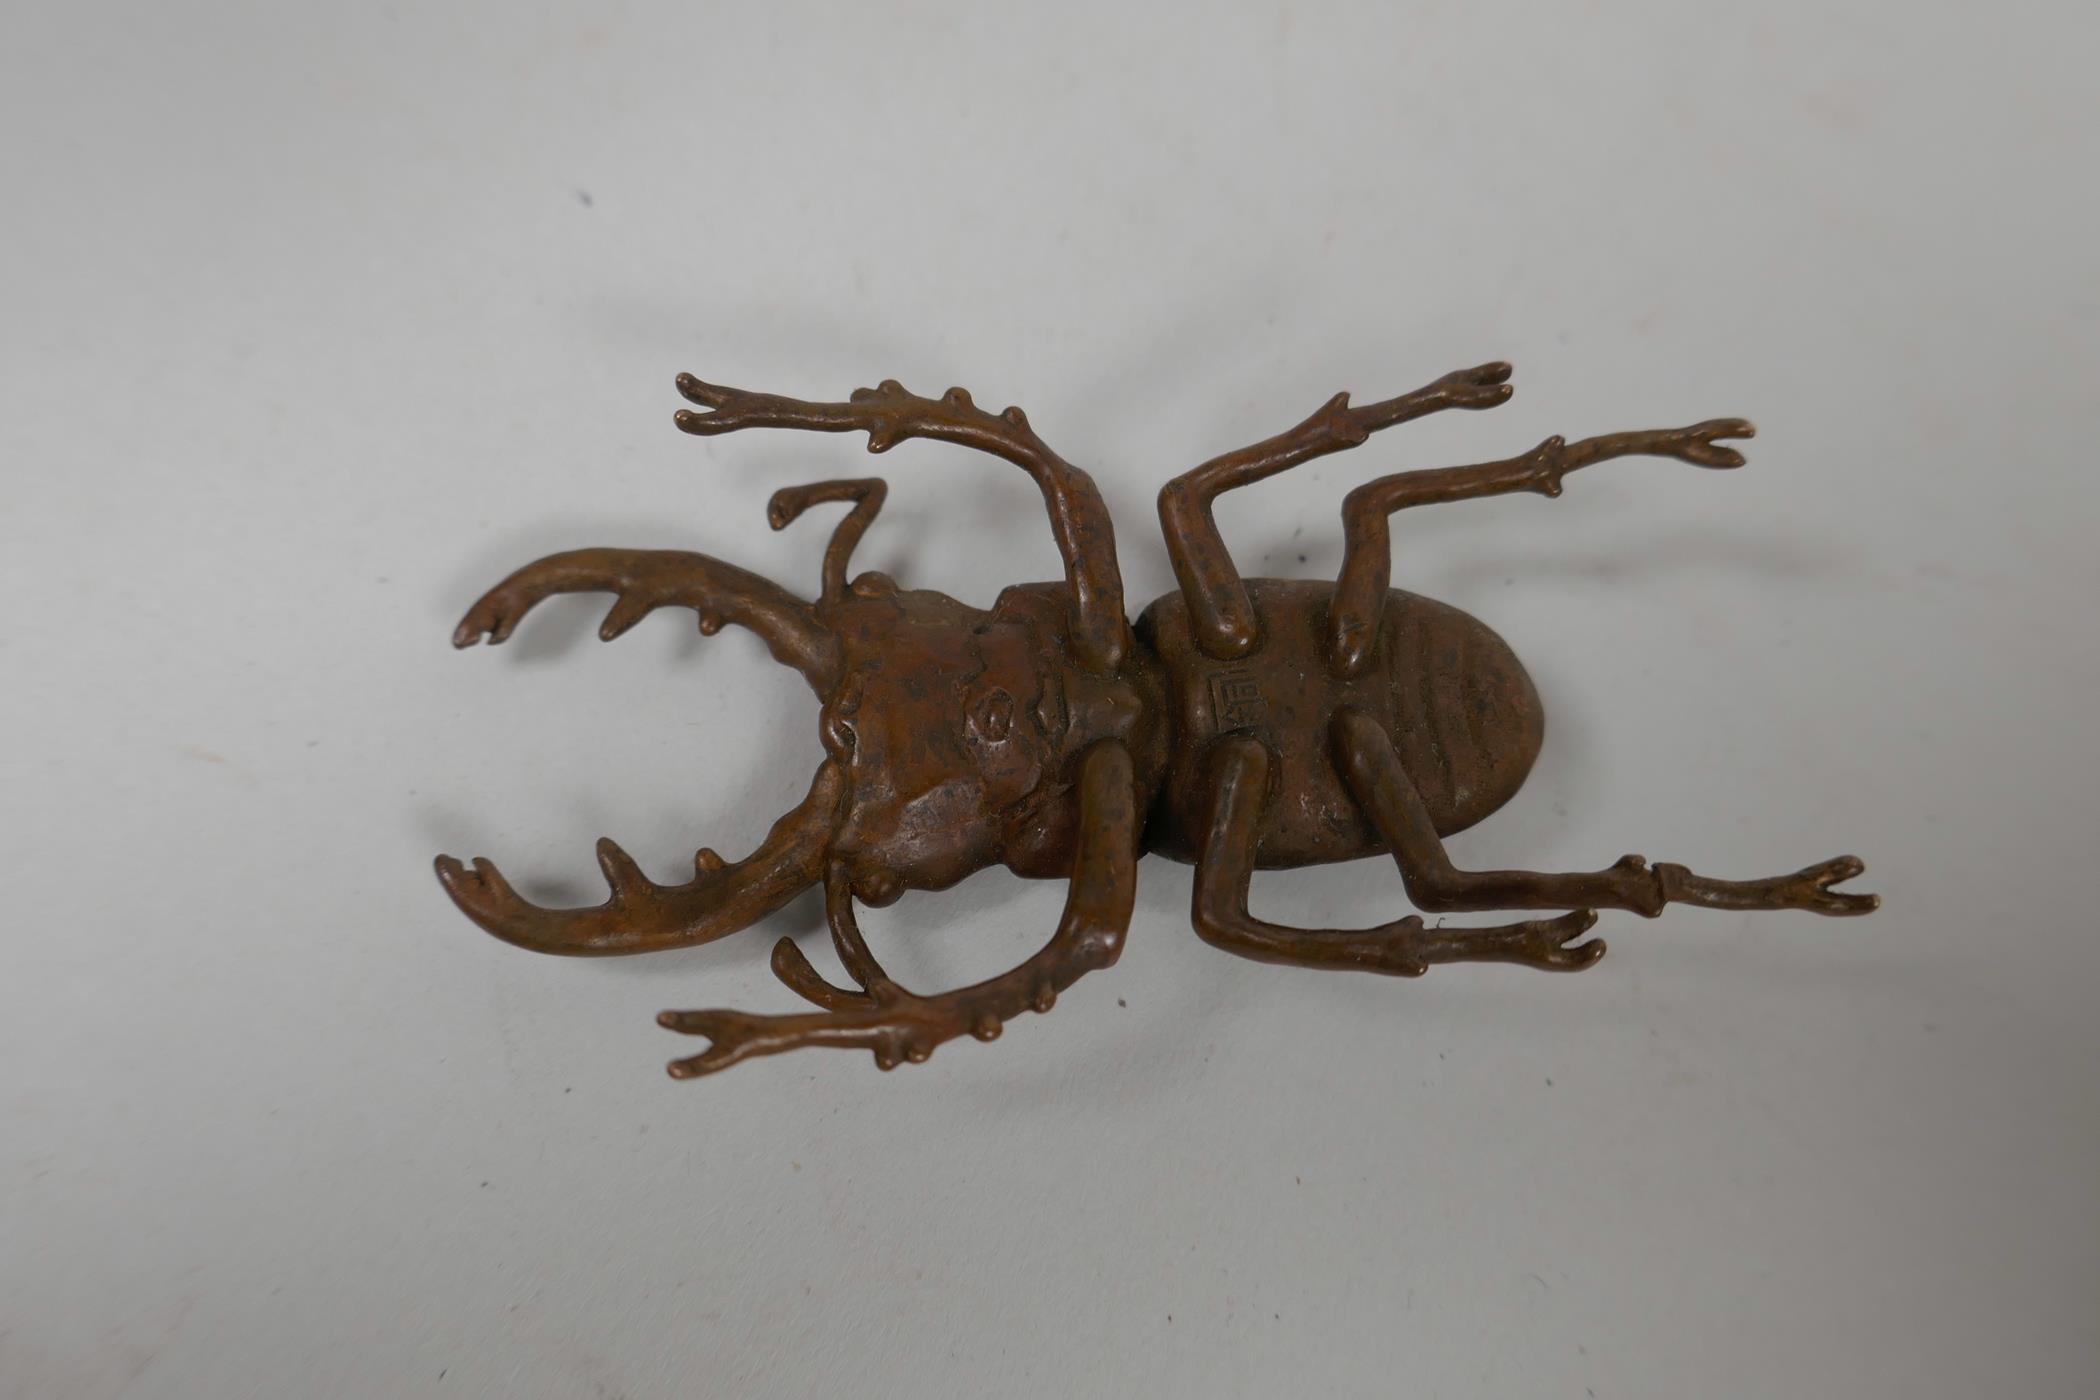 A Japanese Jizai style bronze of a beetle, indistinct impressed marks to base, 3" long - Image 3 of 3